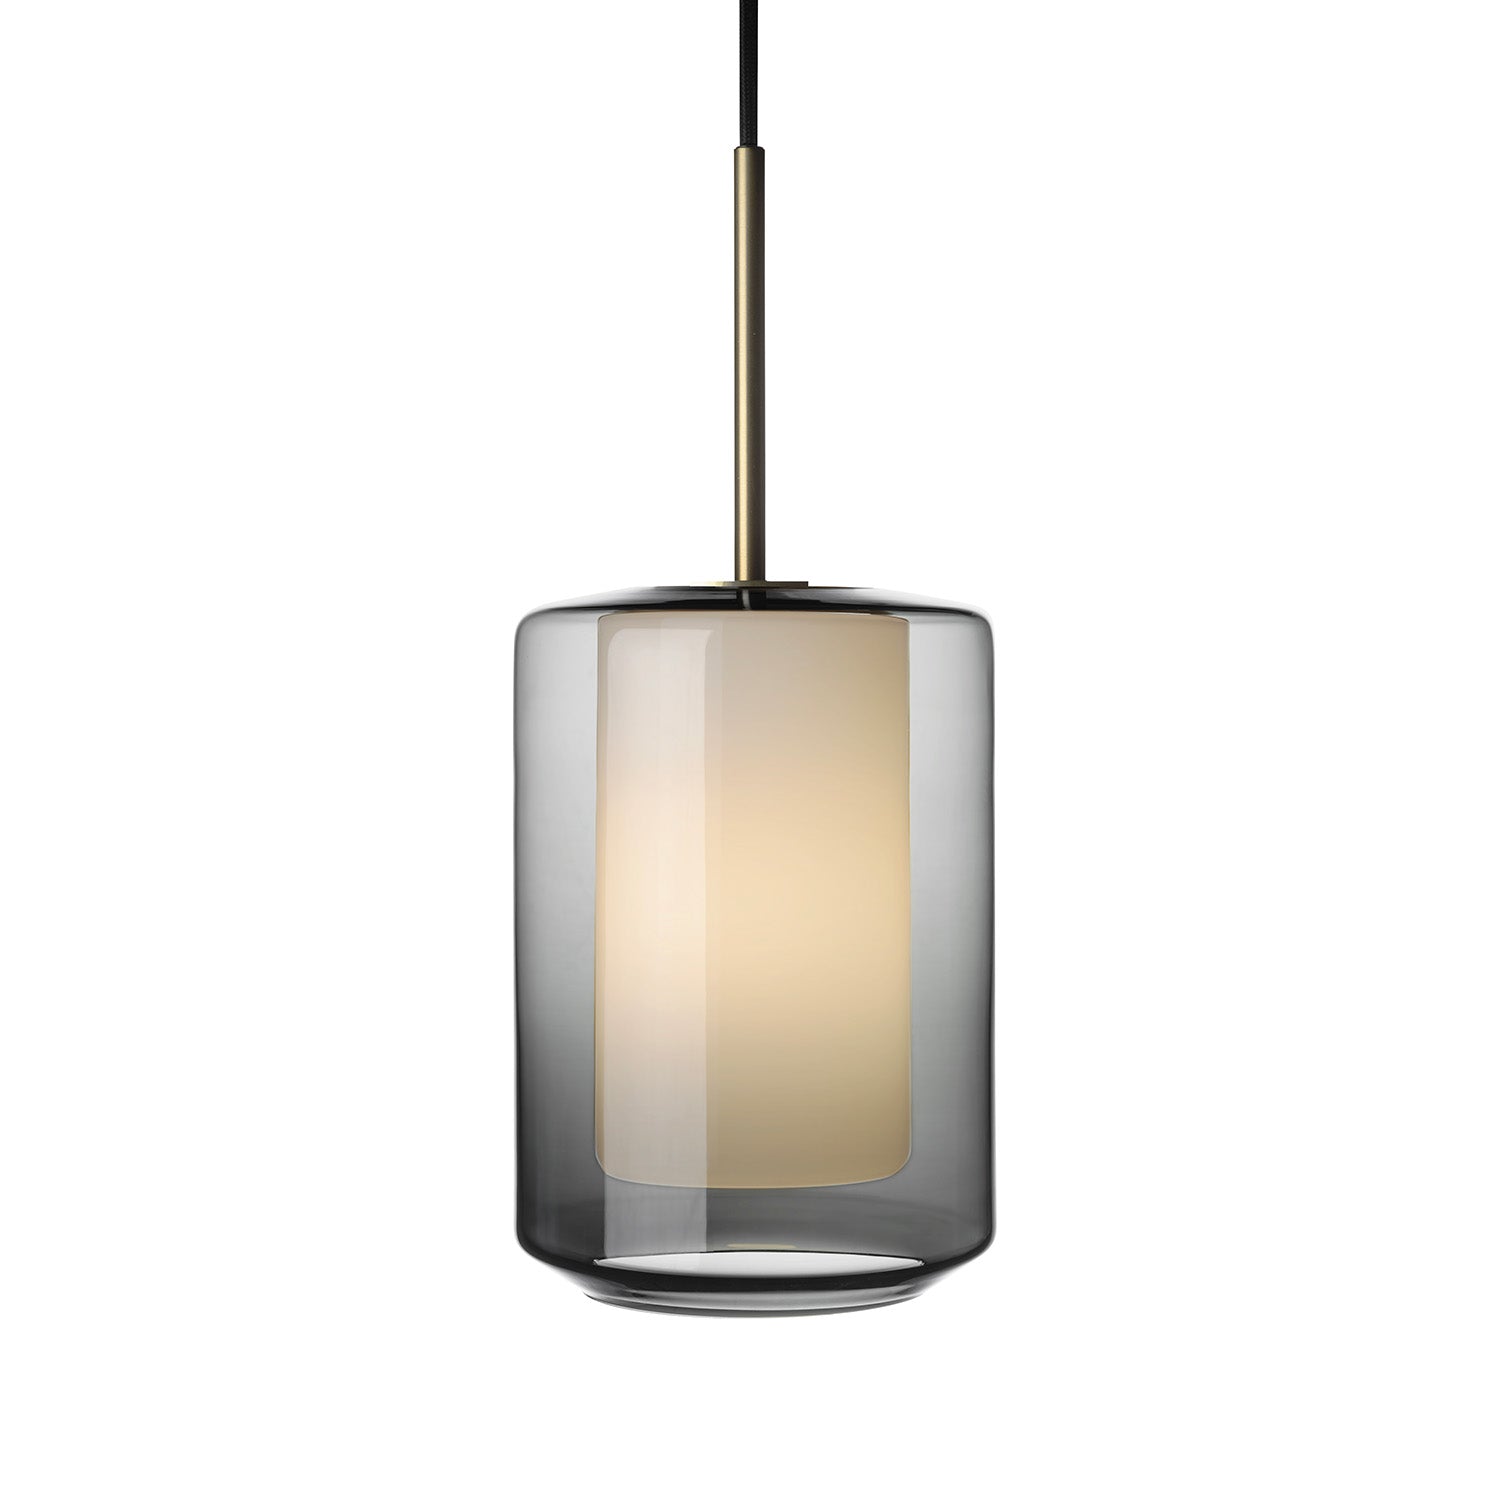 ARCHIVE 4245 - Handcrafted and designer blown smoked glass pendant lamp